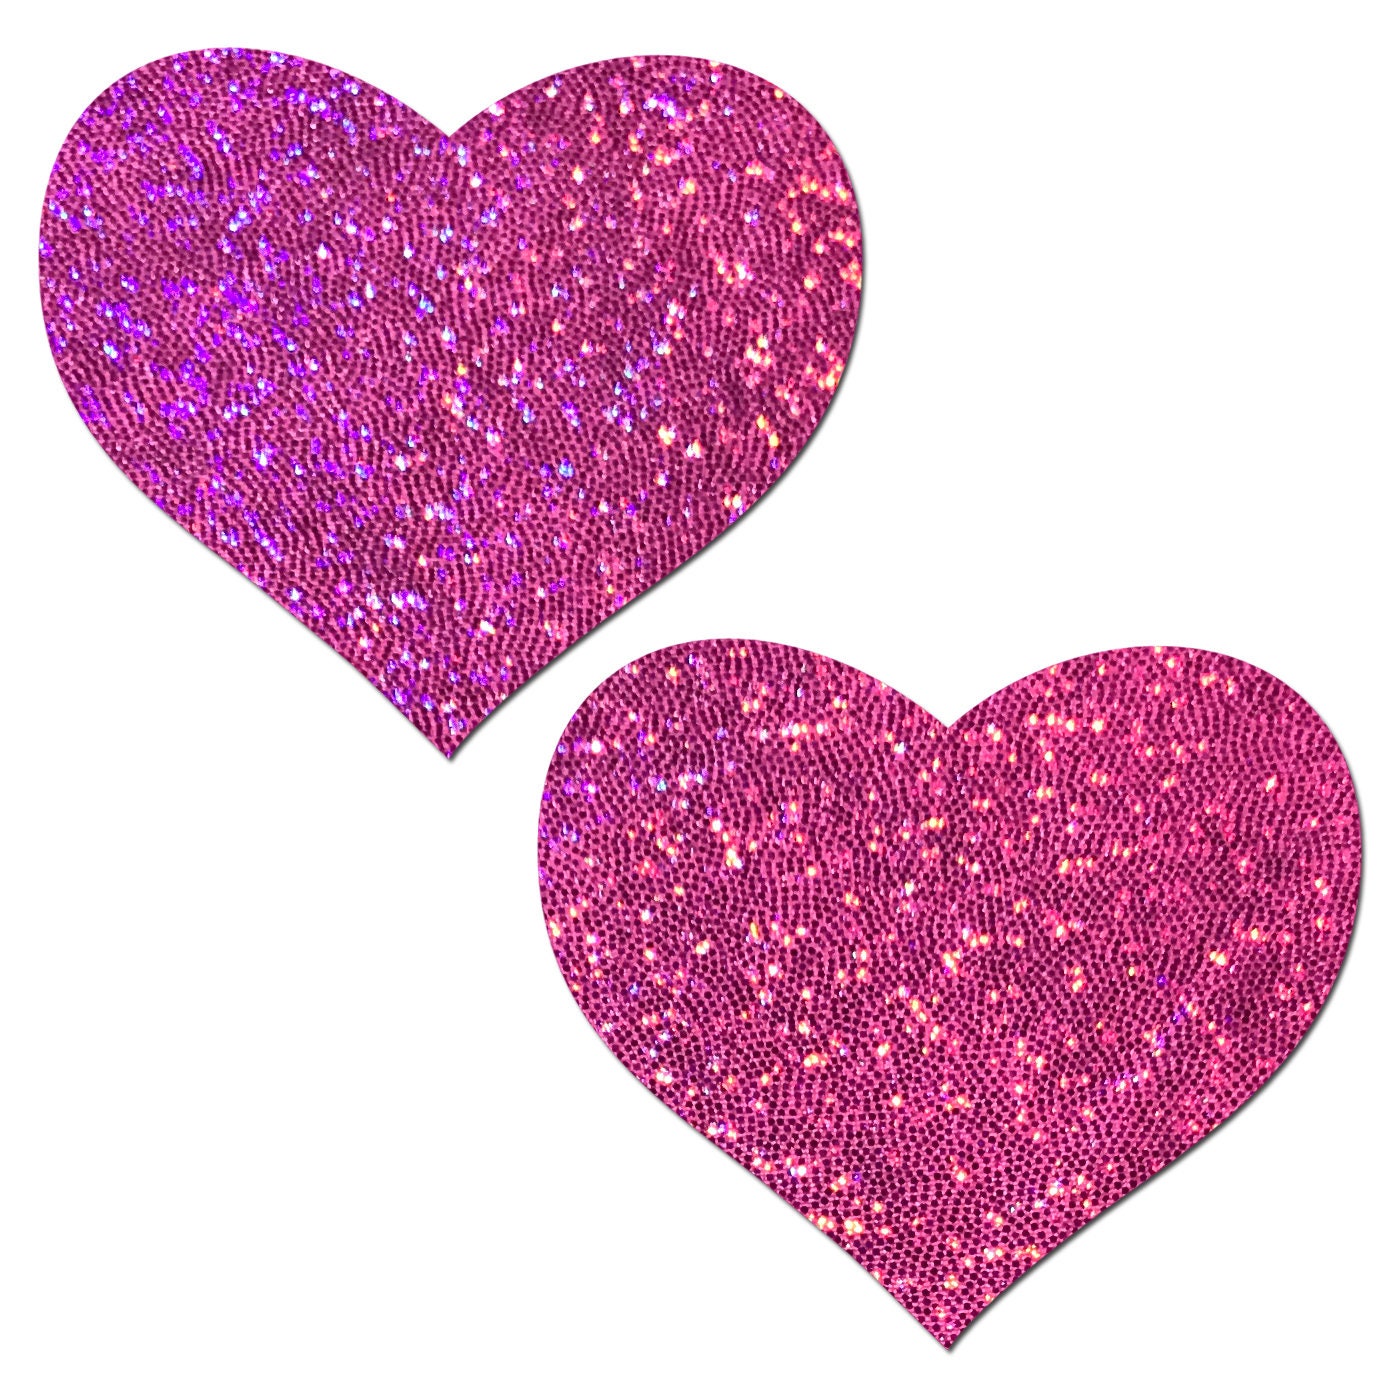 Pasties Heart: Hot Pink Glitter Heart Nipple Pasties by Pastease® O/s -   Canada